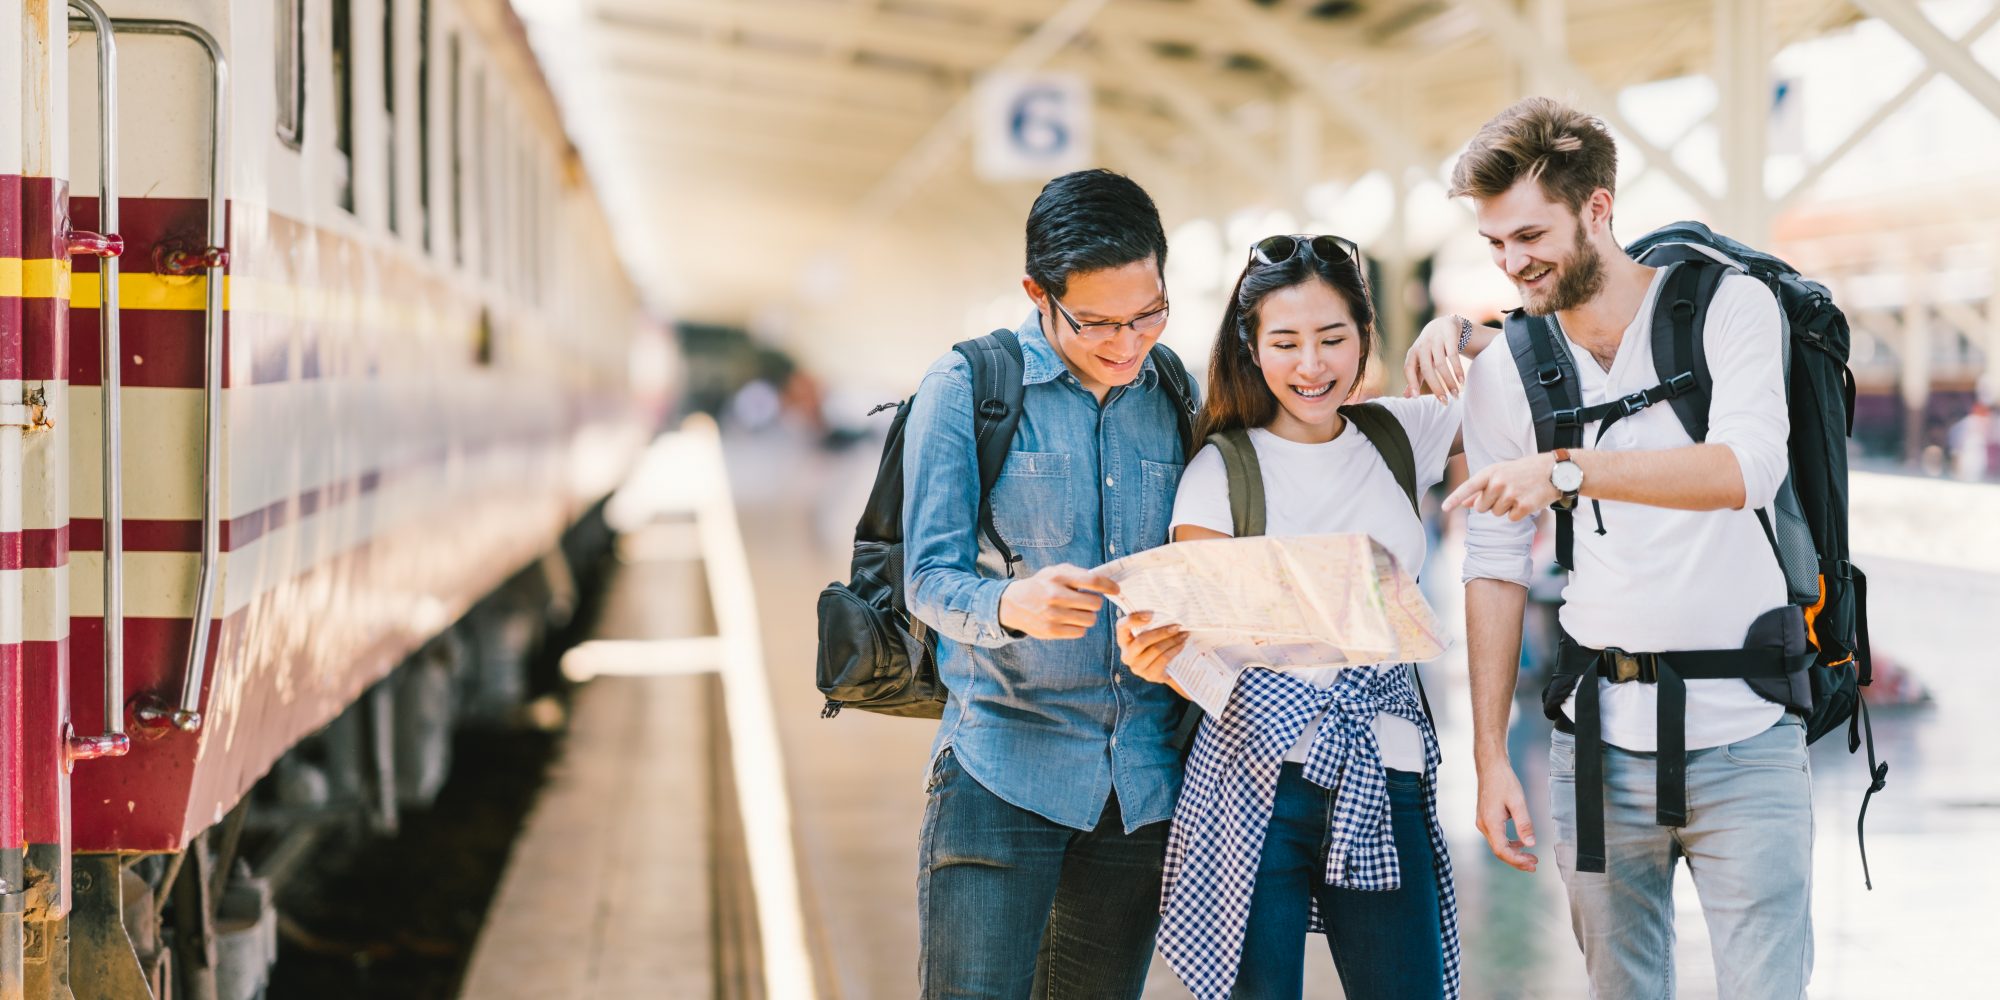 Multiethnic group of friends backpack travelers or college students using local map navigation together at train station platform. Asia travel destination tourism activity or railroad trip concept